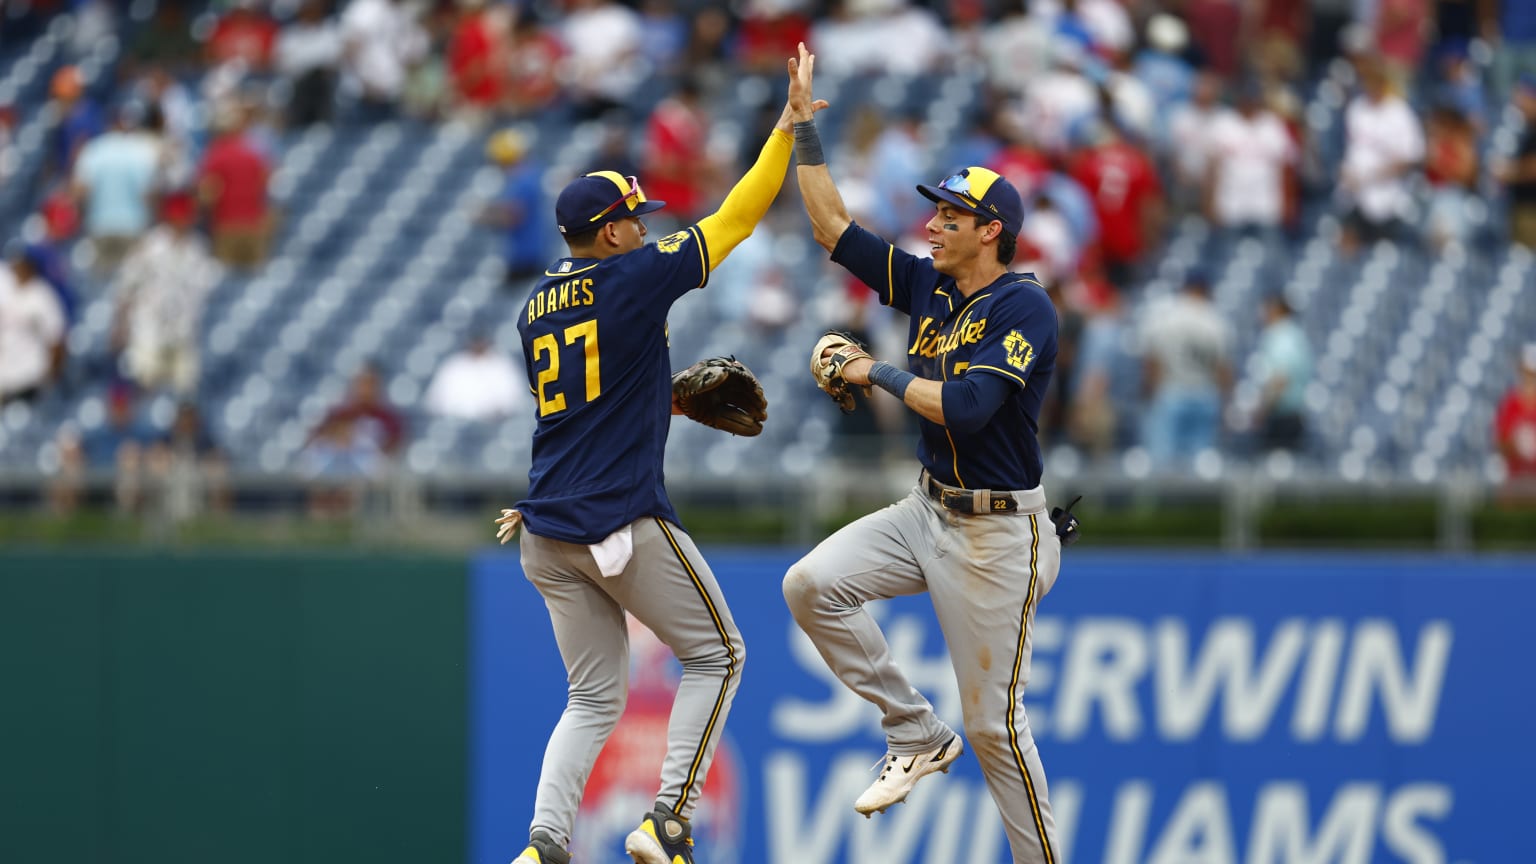 Willy Adames and Christian Yelich celebrate a Brewers win